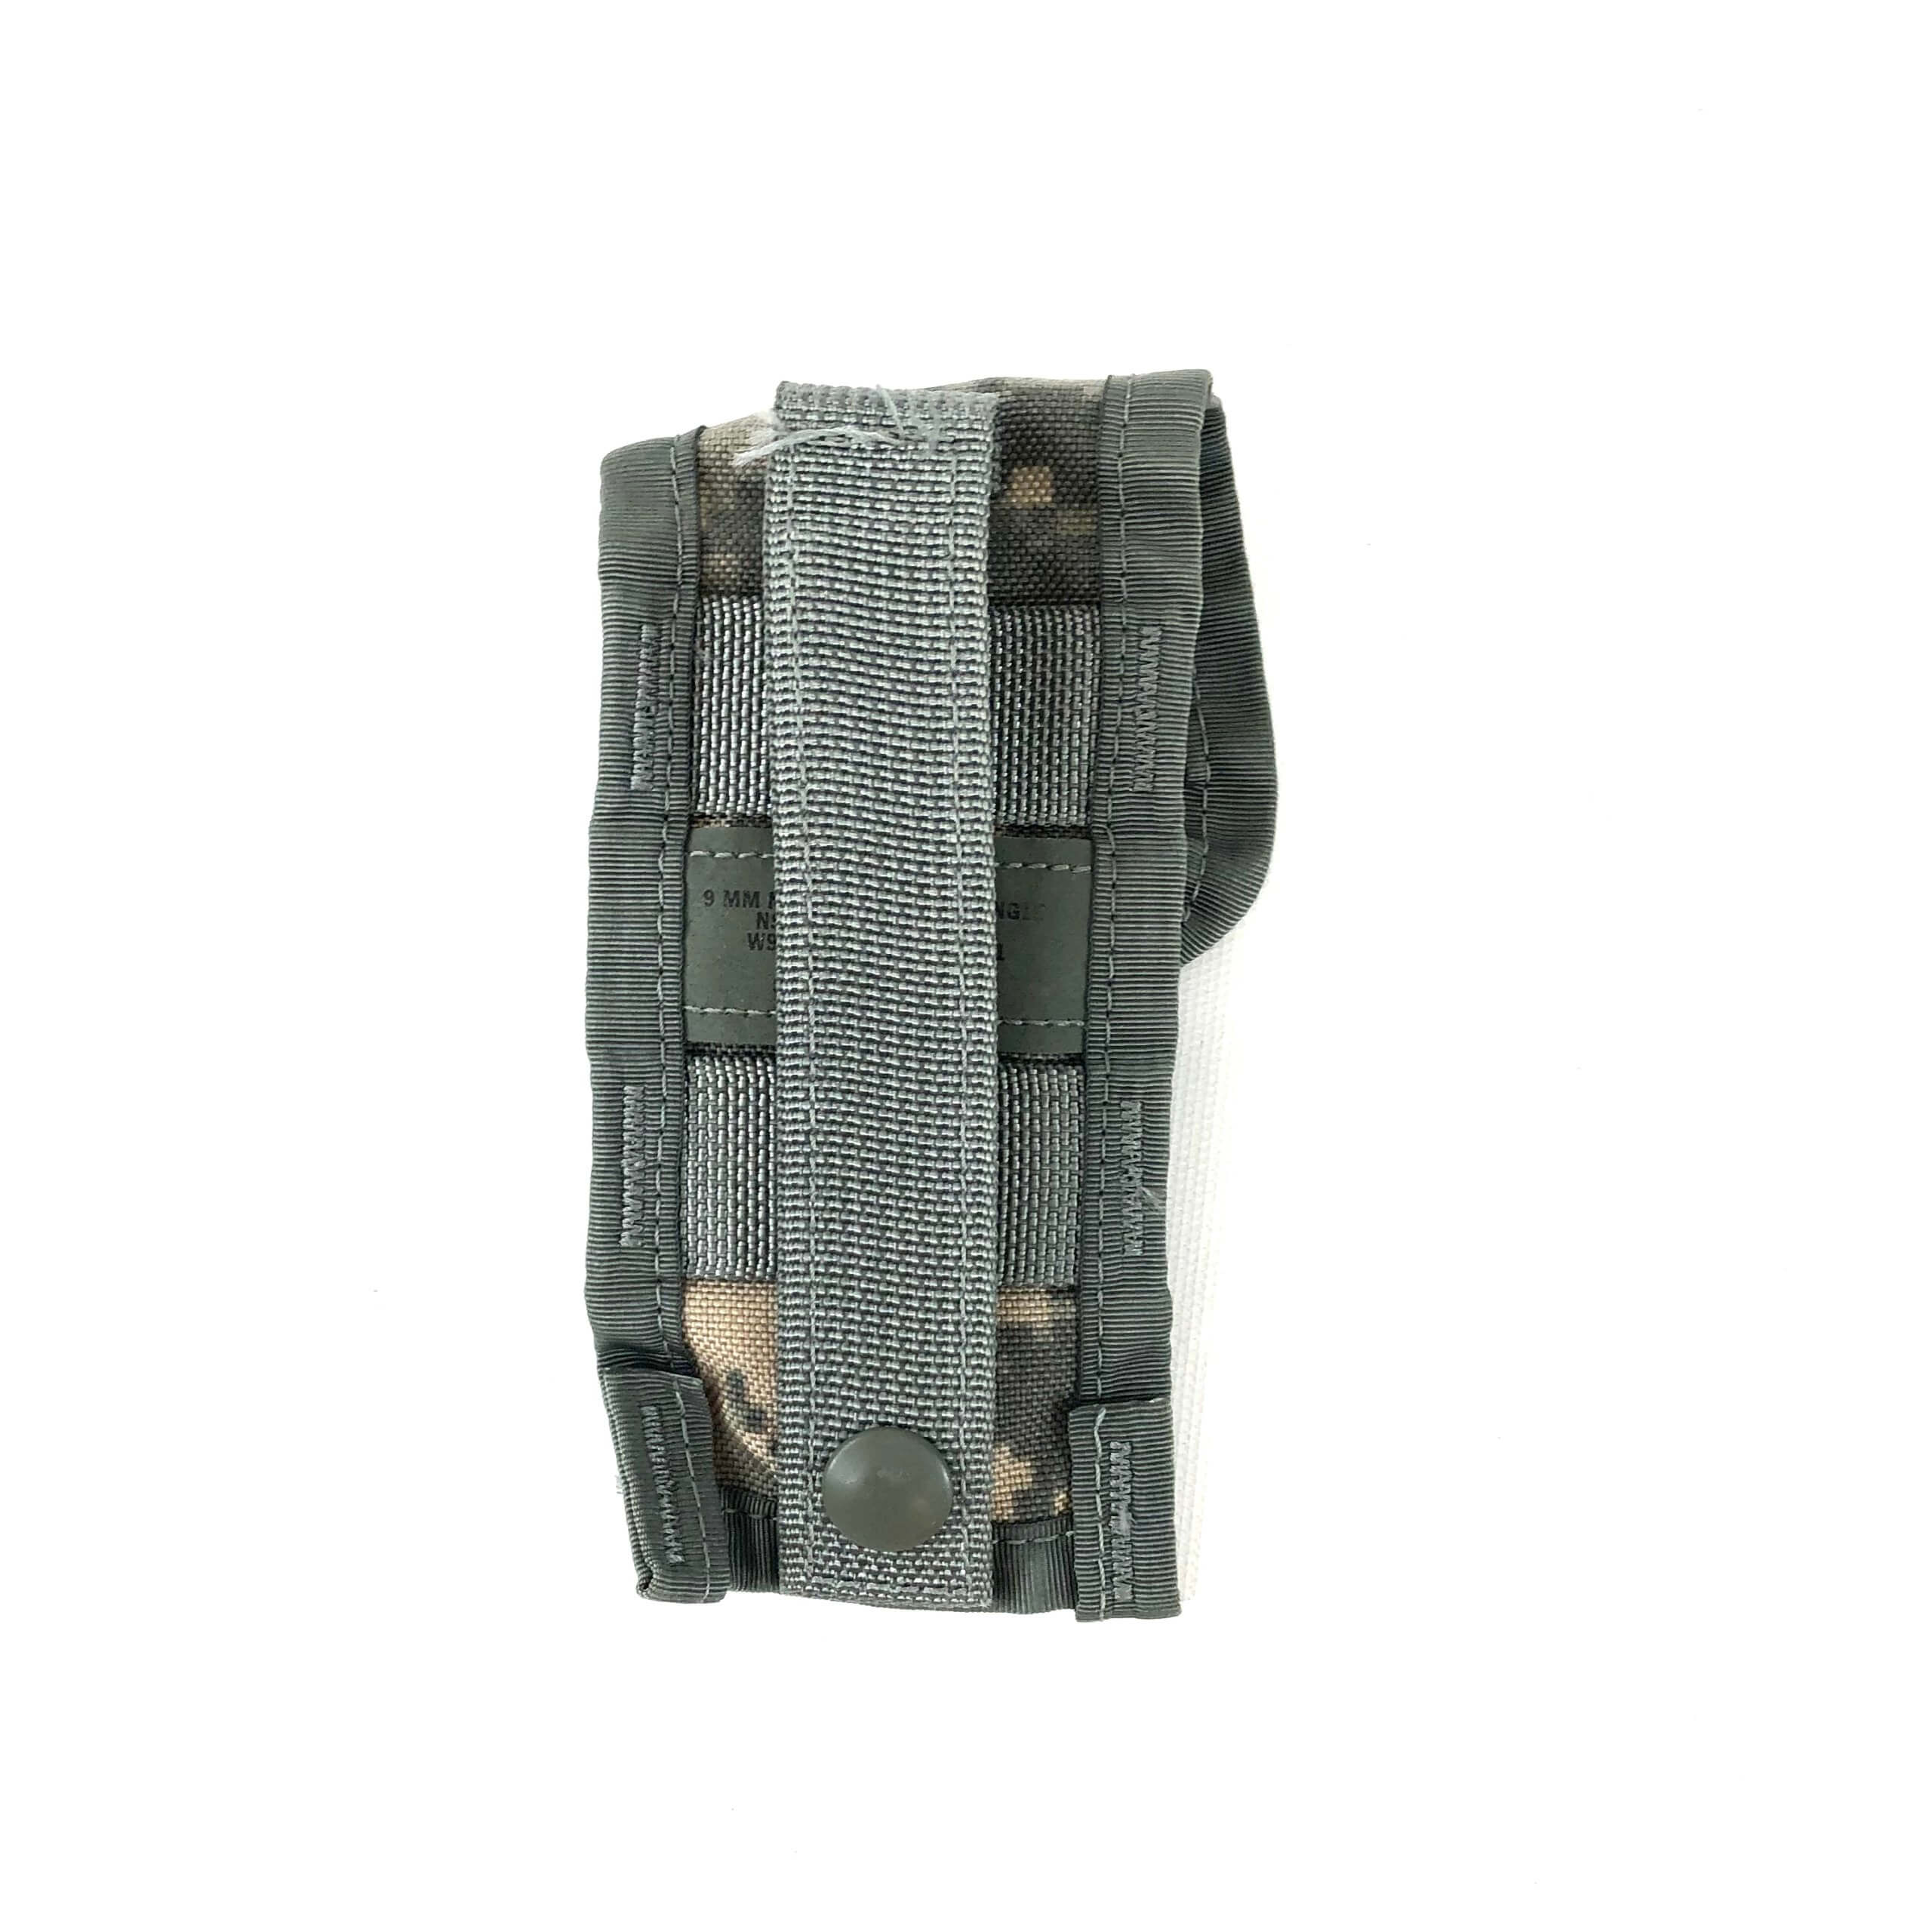 LOT OF 2 NEW US ARMY ACU MOLLE 9MM Single Mag Pouch Tool  92FS M9 M12 F 